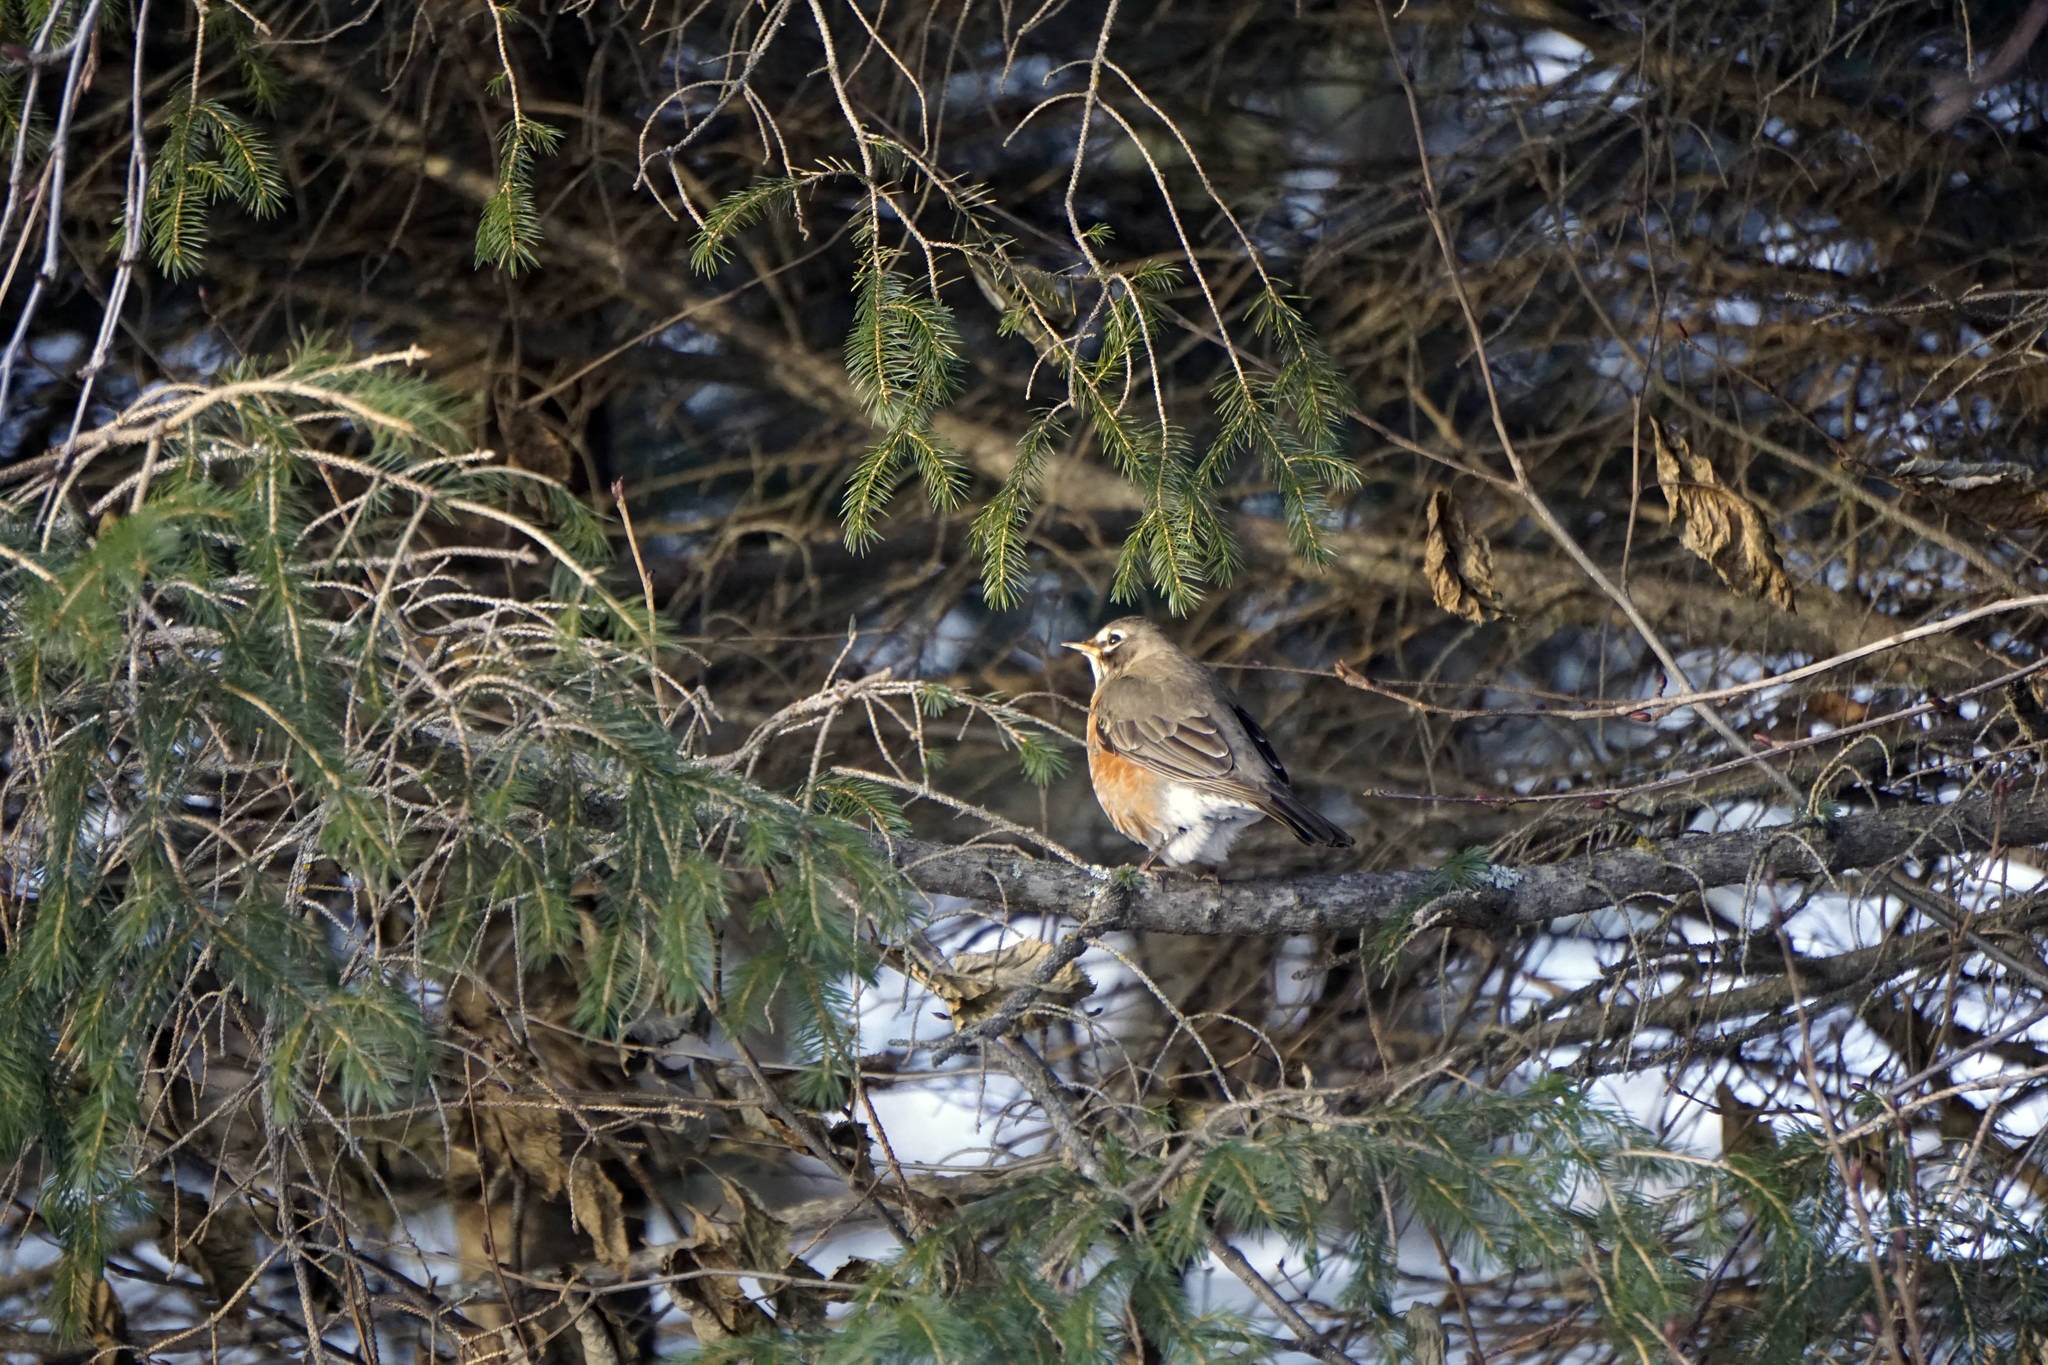 A juvenile robin feeds in spruce trees near Beluga Lake on Jan. 8, 2019, in Homer, Alaska. (Photo by Michael Armstrong/Homer News)